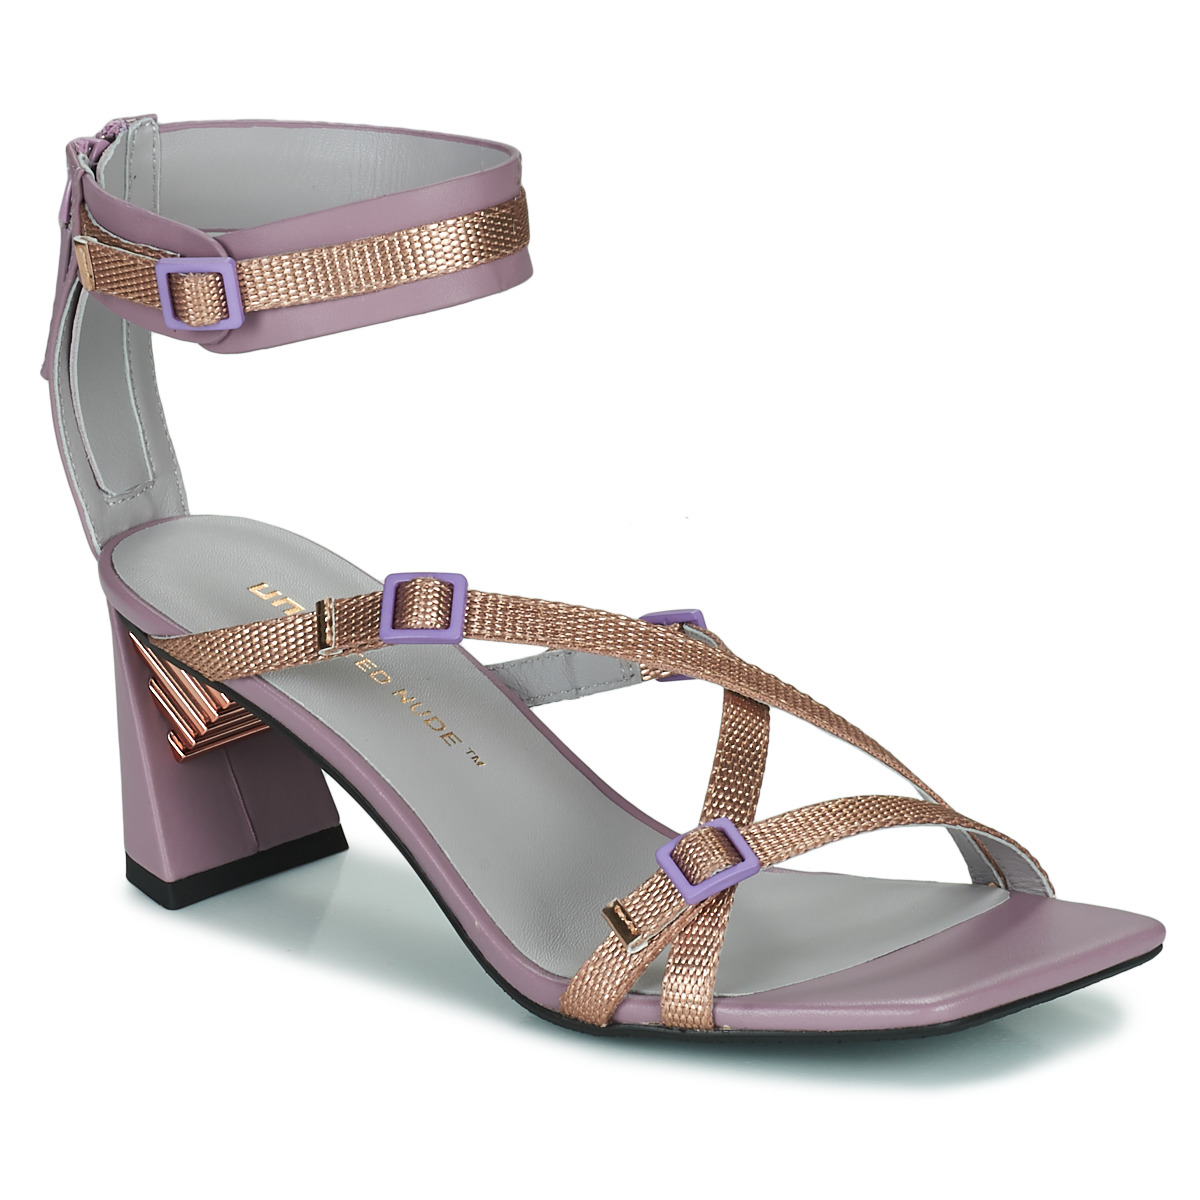 Chaussures Femme Tige : Cuir/textile United nude SONAR MID Rose